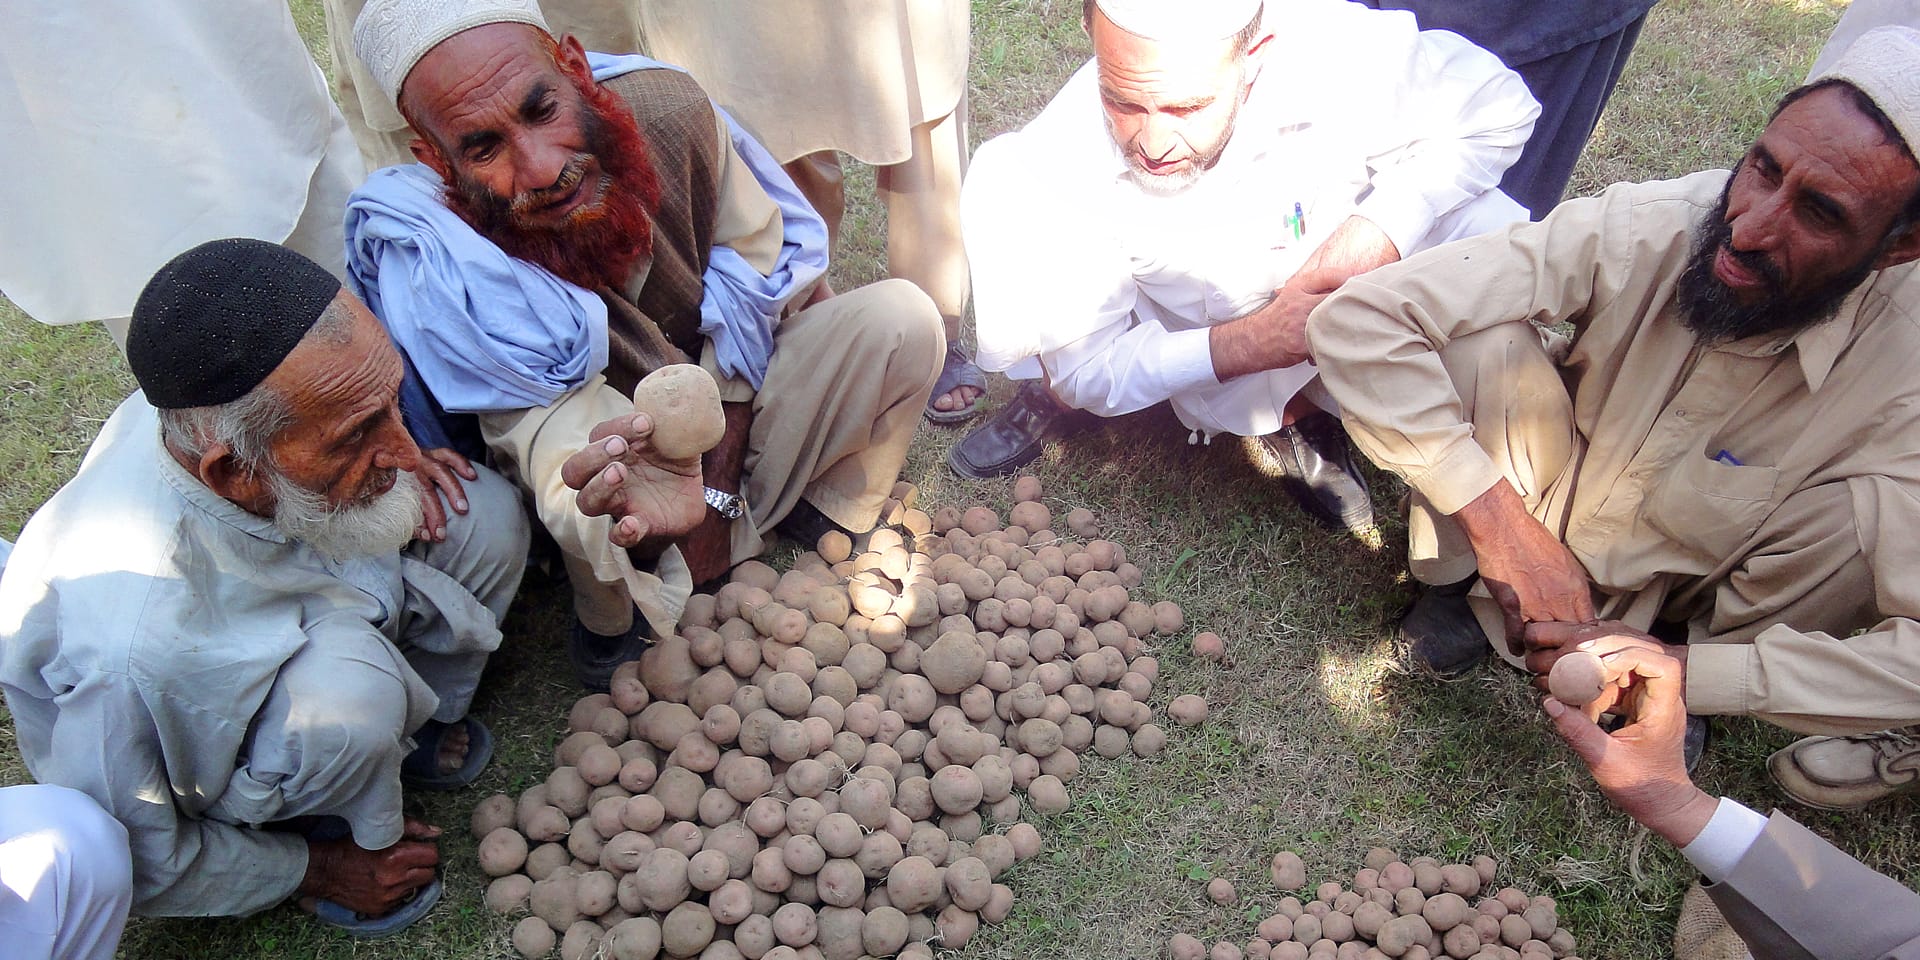 Image of several men kneeling in a circle around a large pile of potatoes. One of the men holds one up to inspect it.